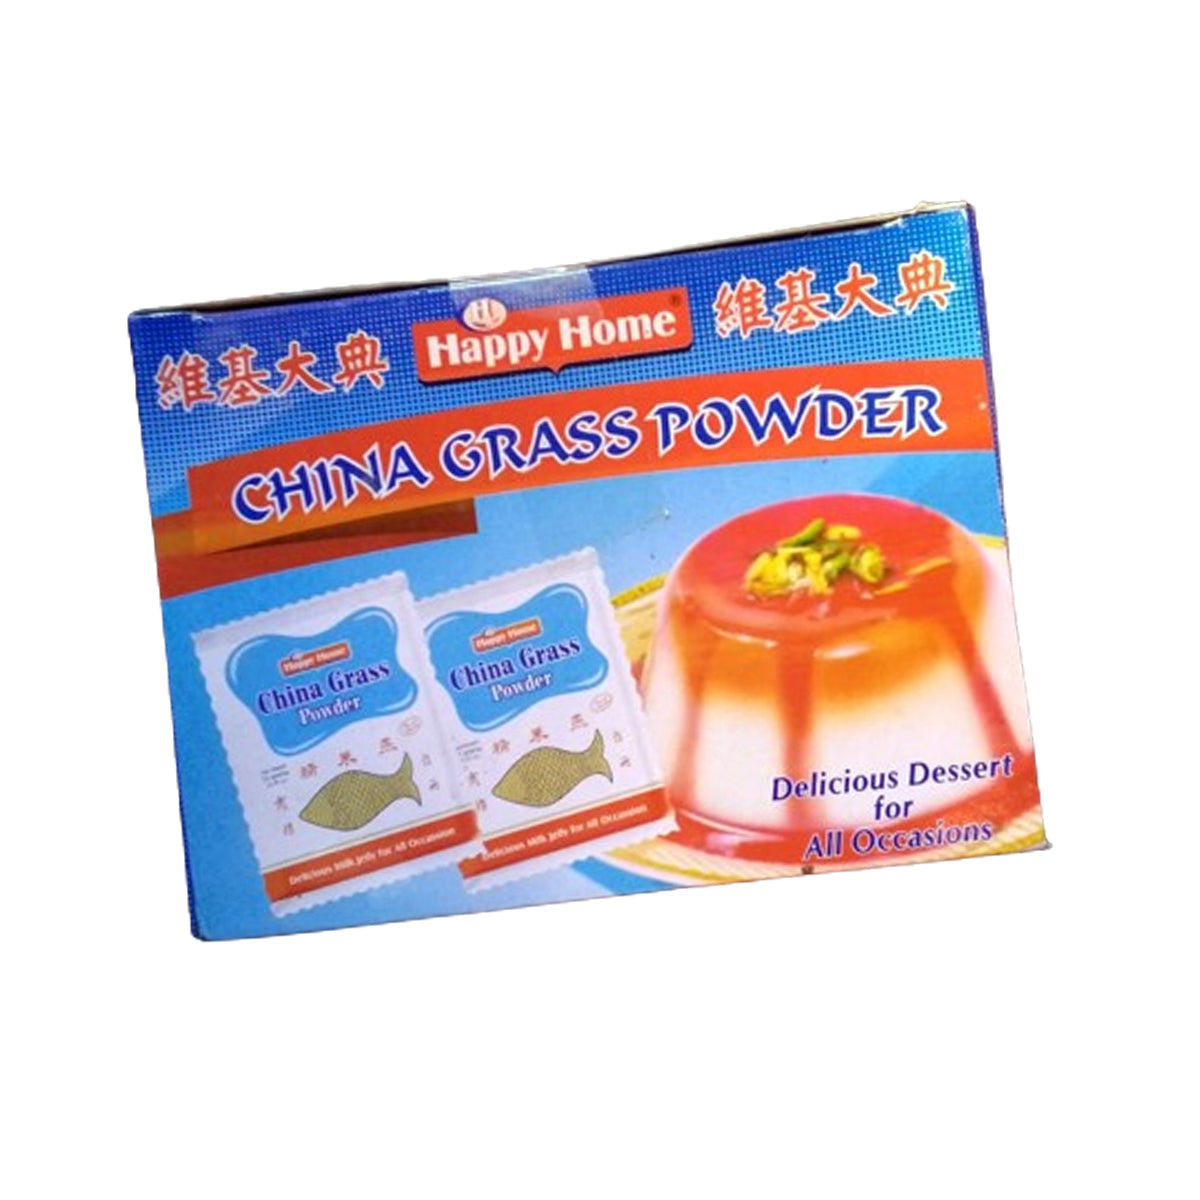 Happy Home - China Grass Powder - 10g - 24 Count